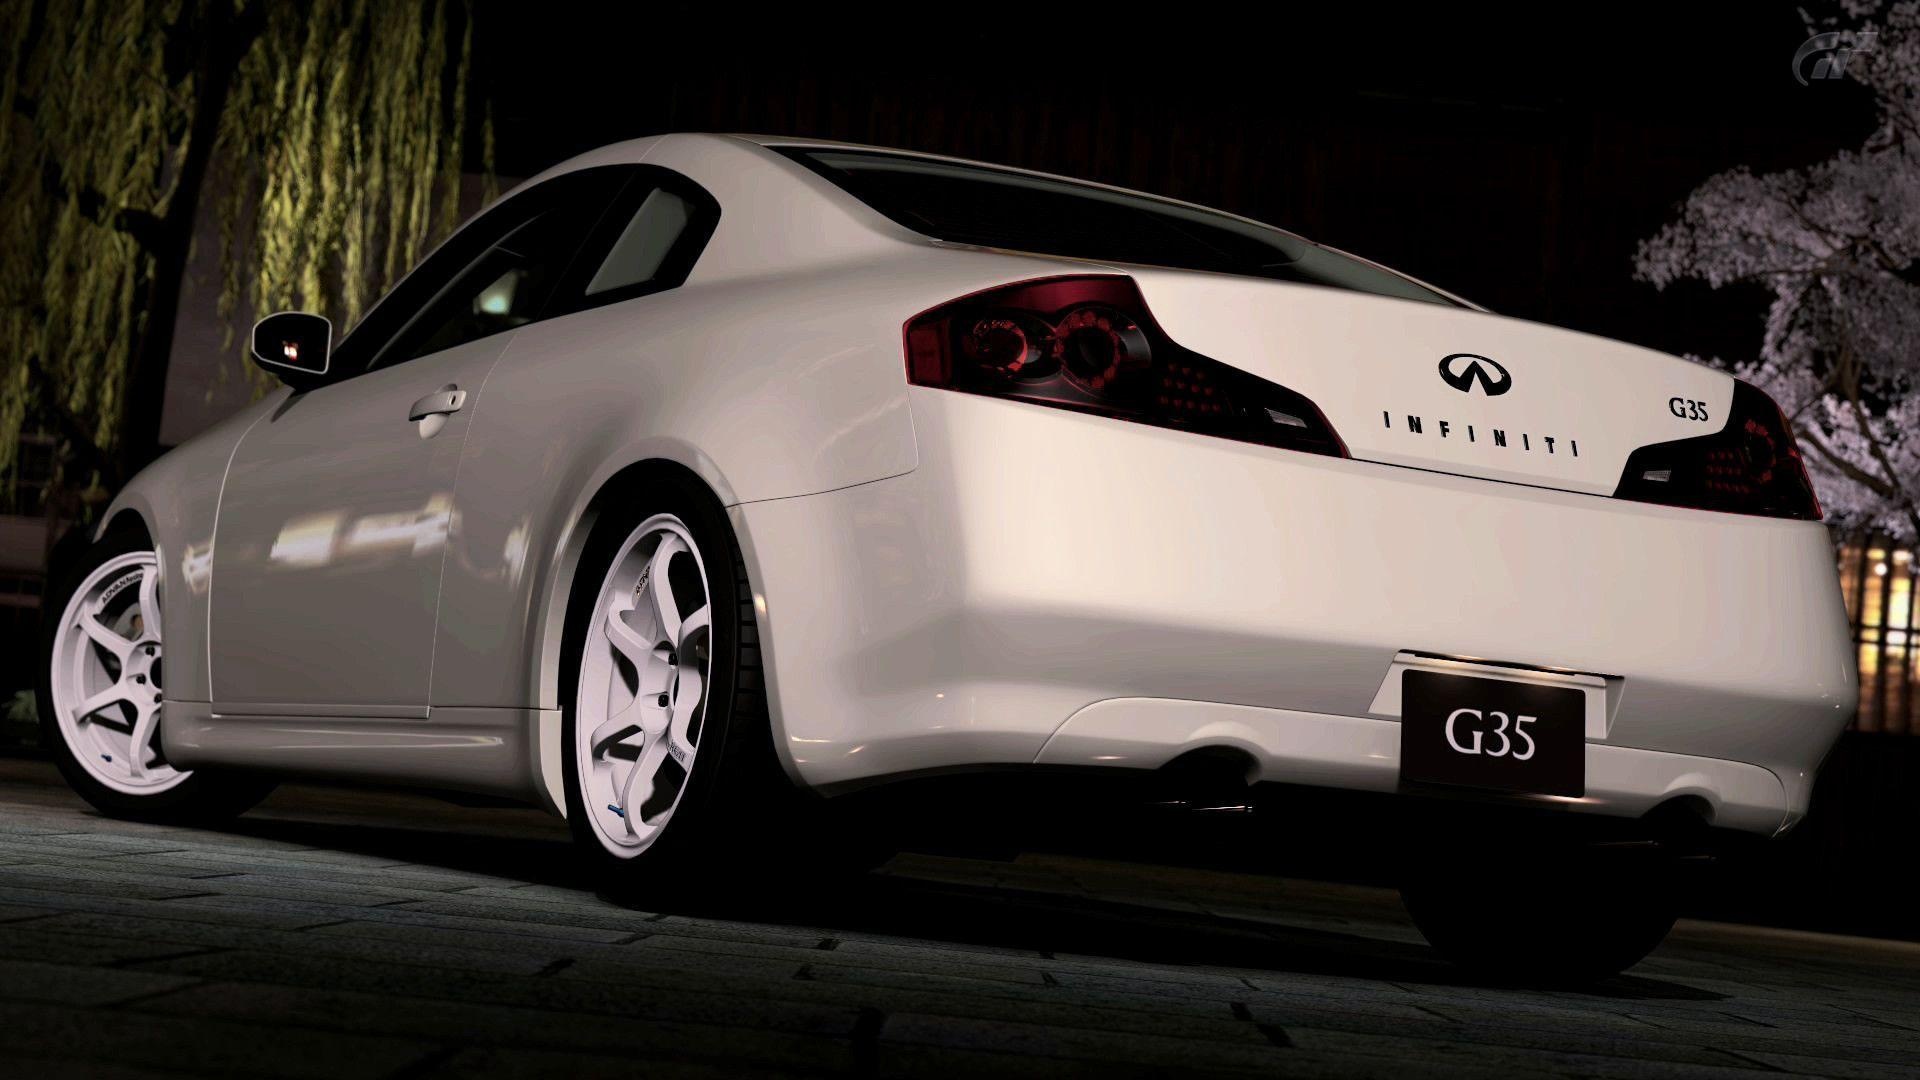 Infiniti G35 Coupe, HD wallpapers, Car enthusiasts, Speed and luxury, 1920x1080 Full HD Desktop